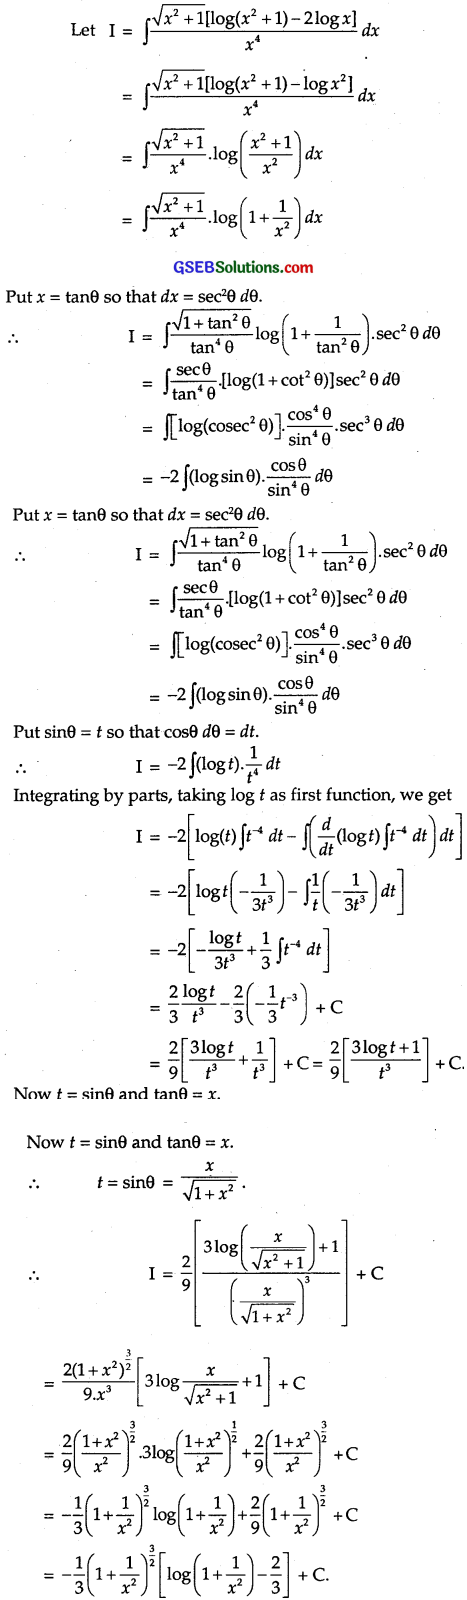 GSEB Solutions Class 12 Maths Chapter 7 Integrals Miscellaneous Exercise img 25